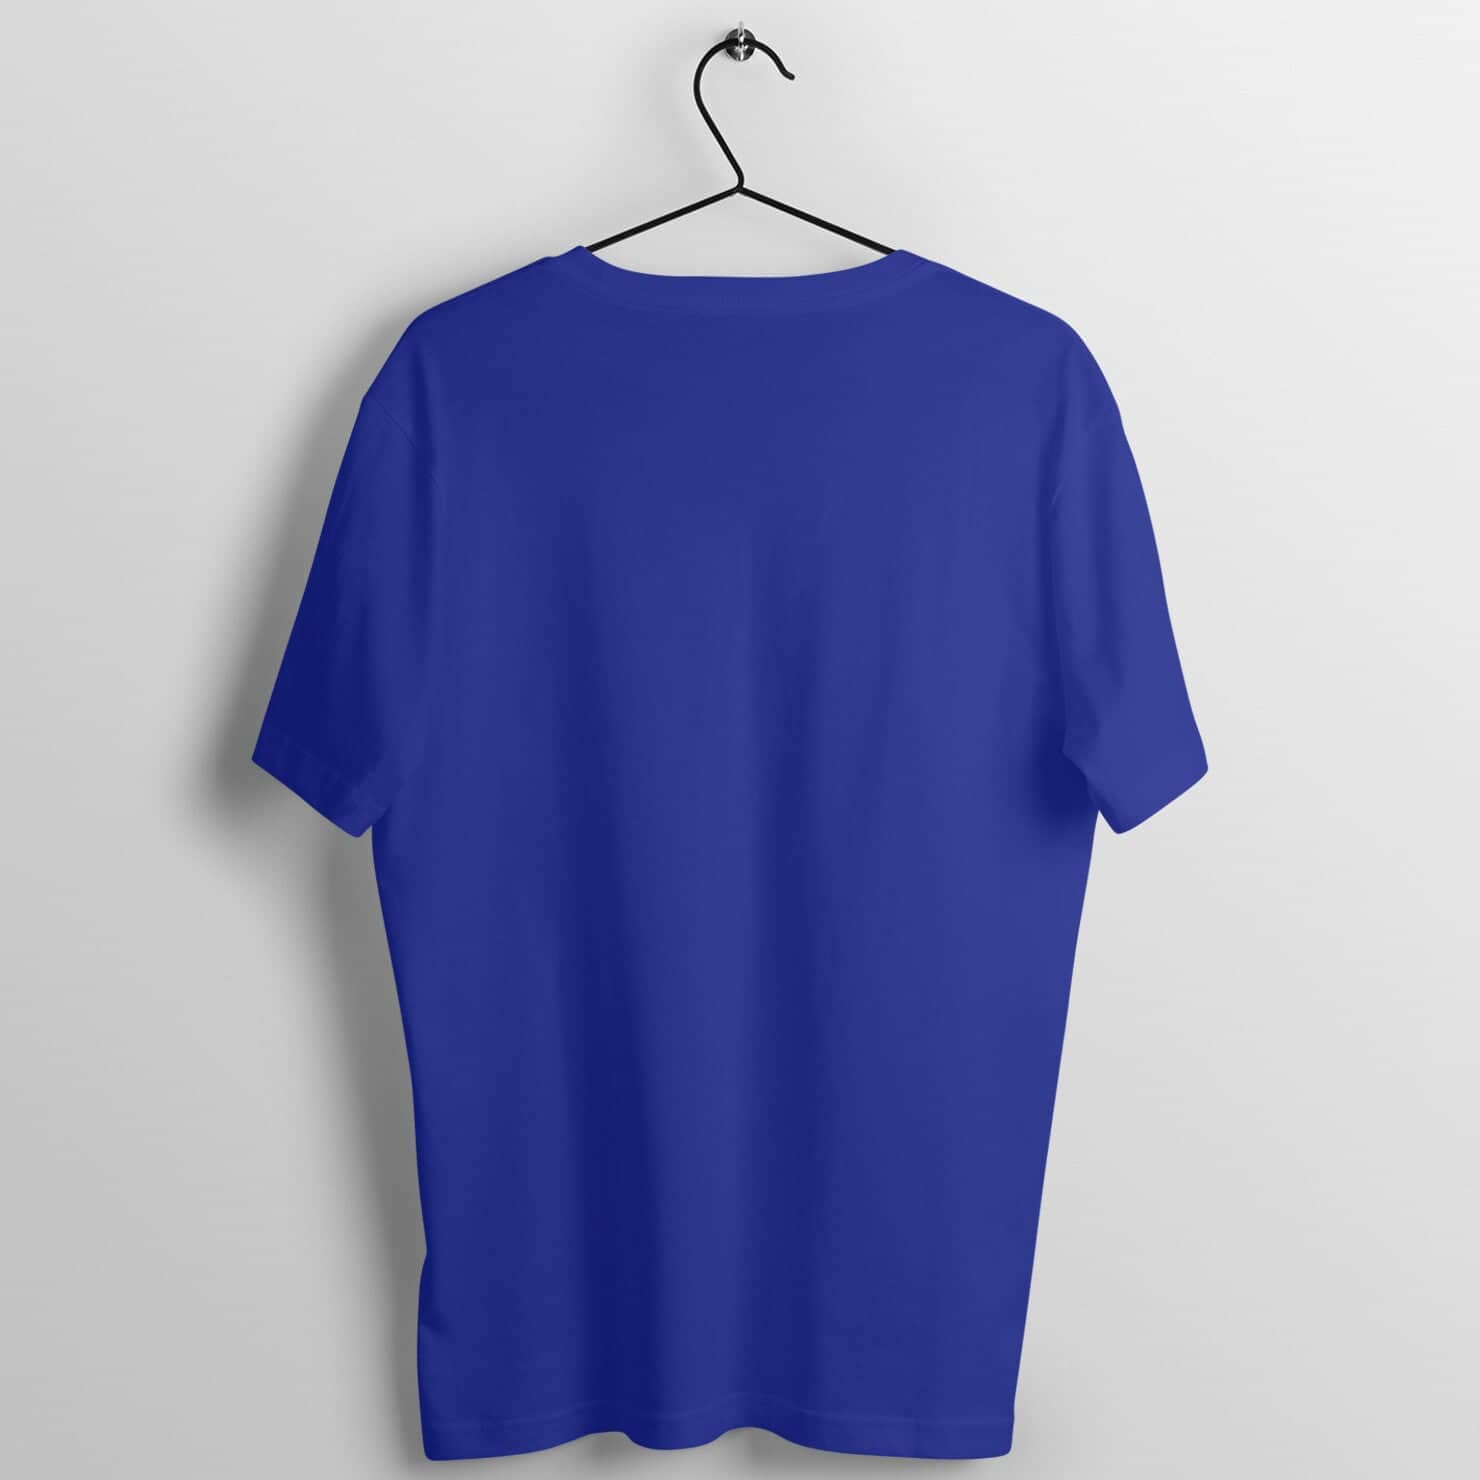 Warning Retired Knows Everything Royal Blue T Shirt for Retired Men Printrove 